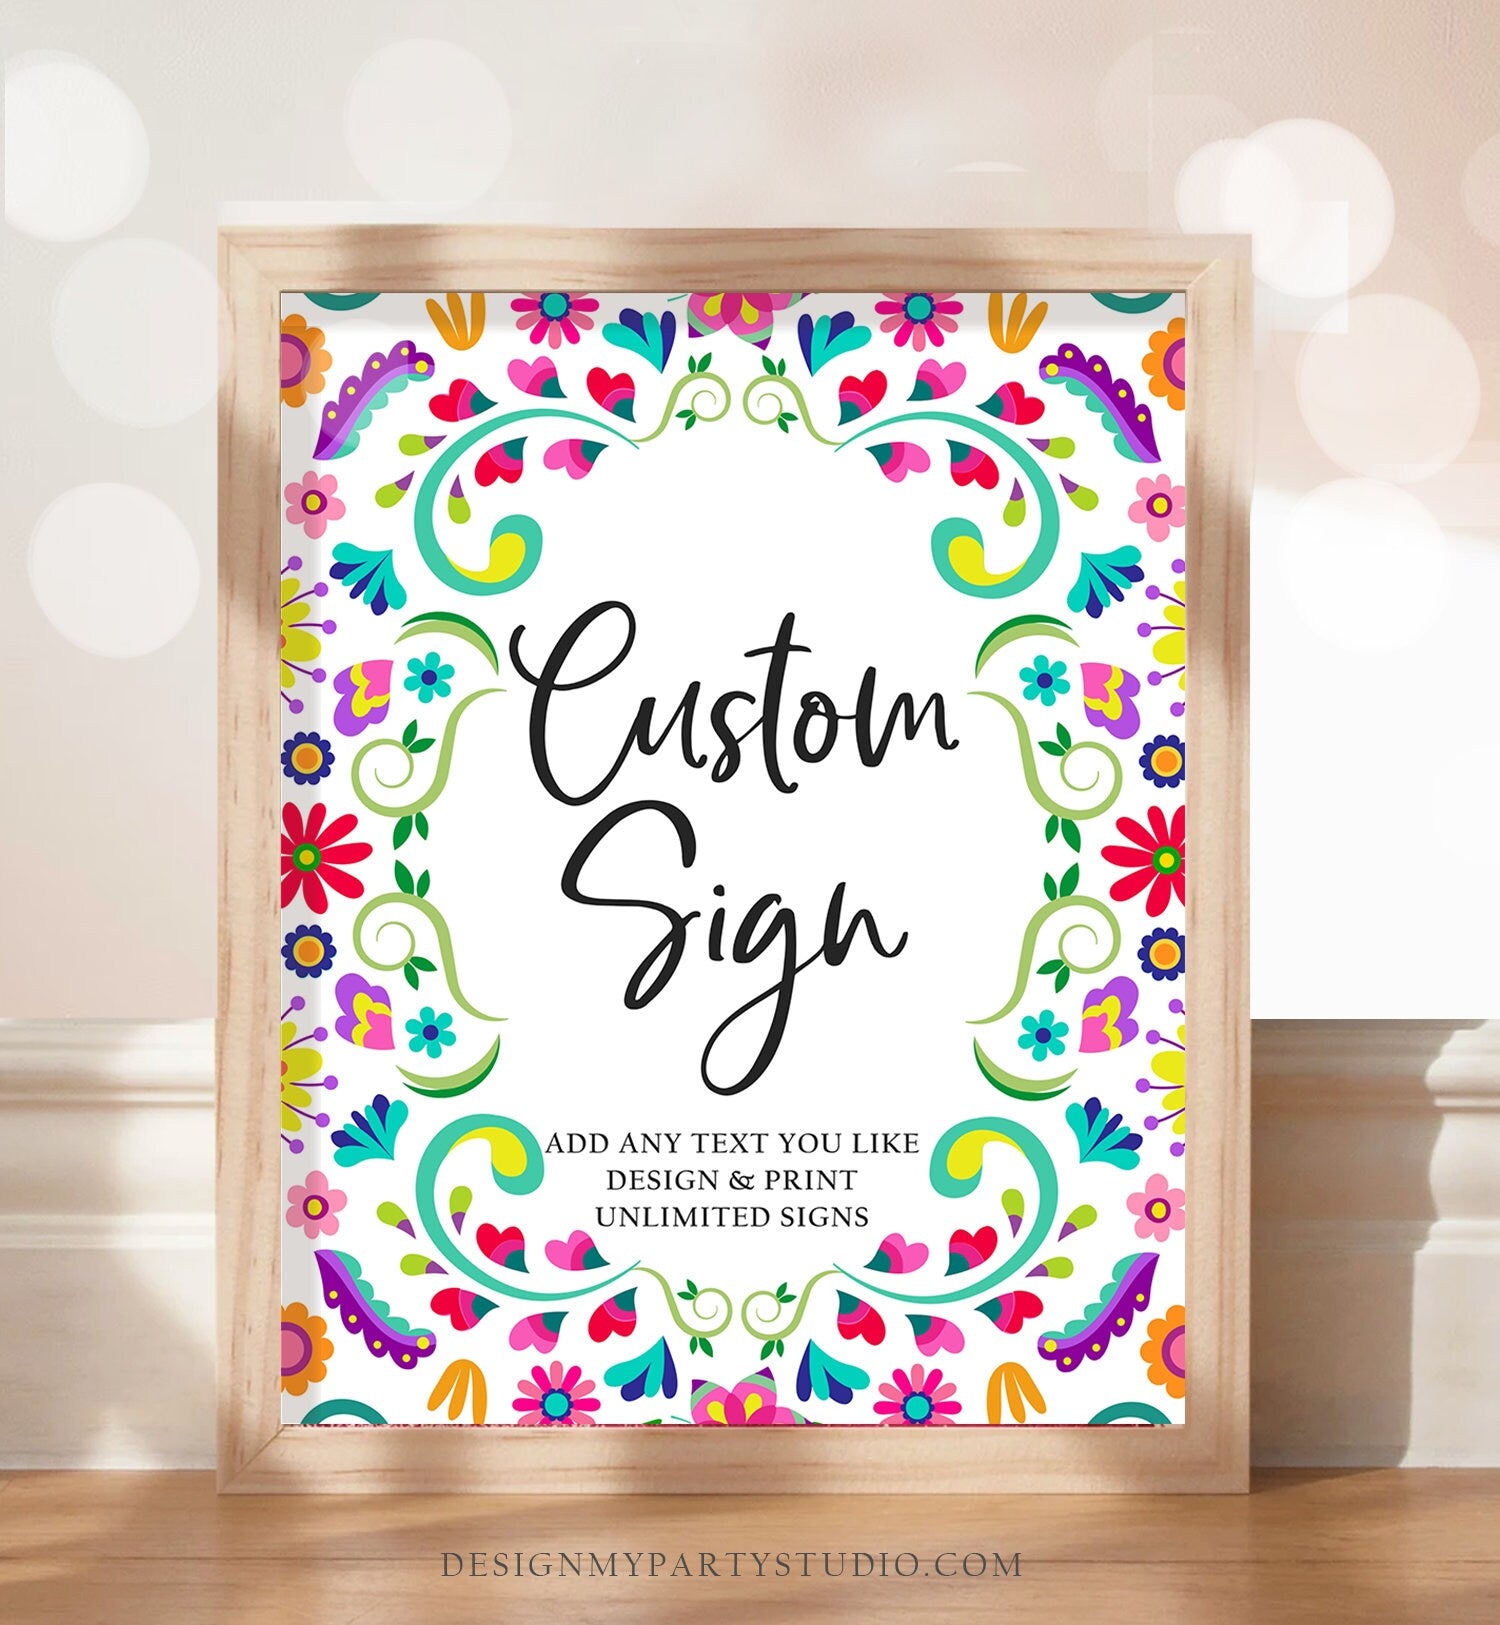 Editable Custom Sign Fiesta Party Sign Fiesta Decor Mexico Table Sign Shower Decor Mexican Floral Flowers Corjl Template Printable 8x10 0466